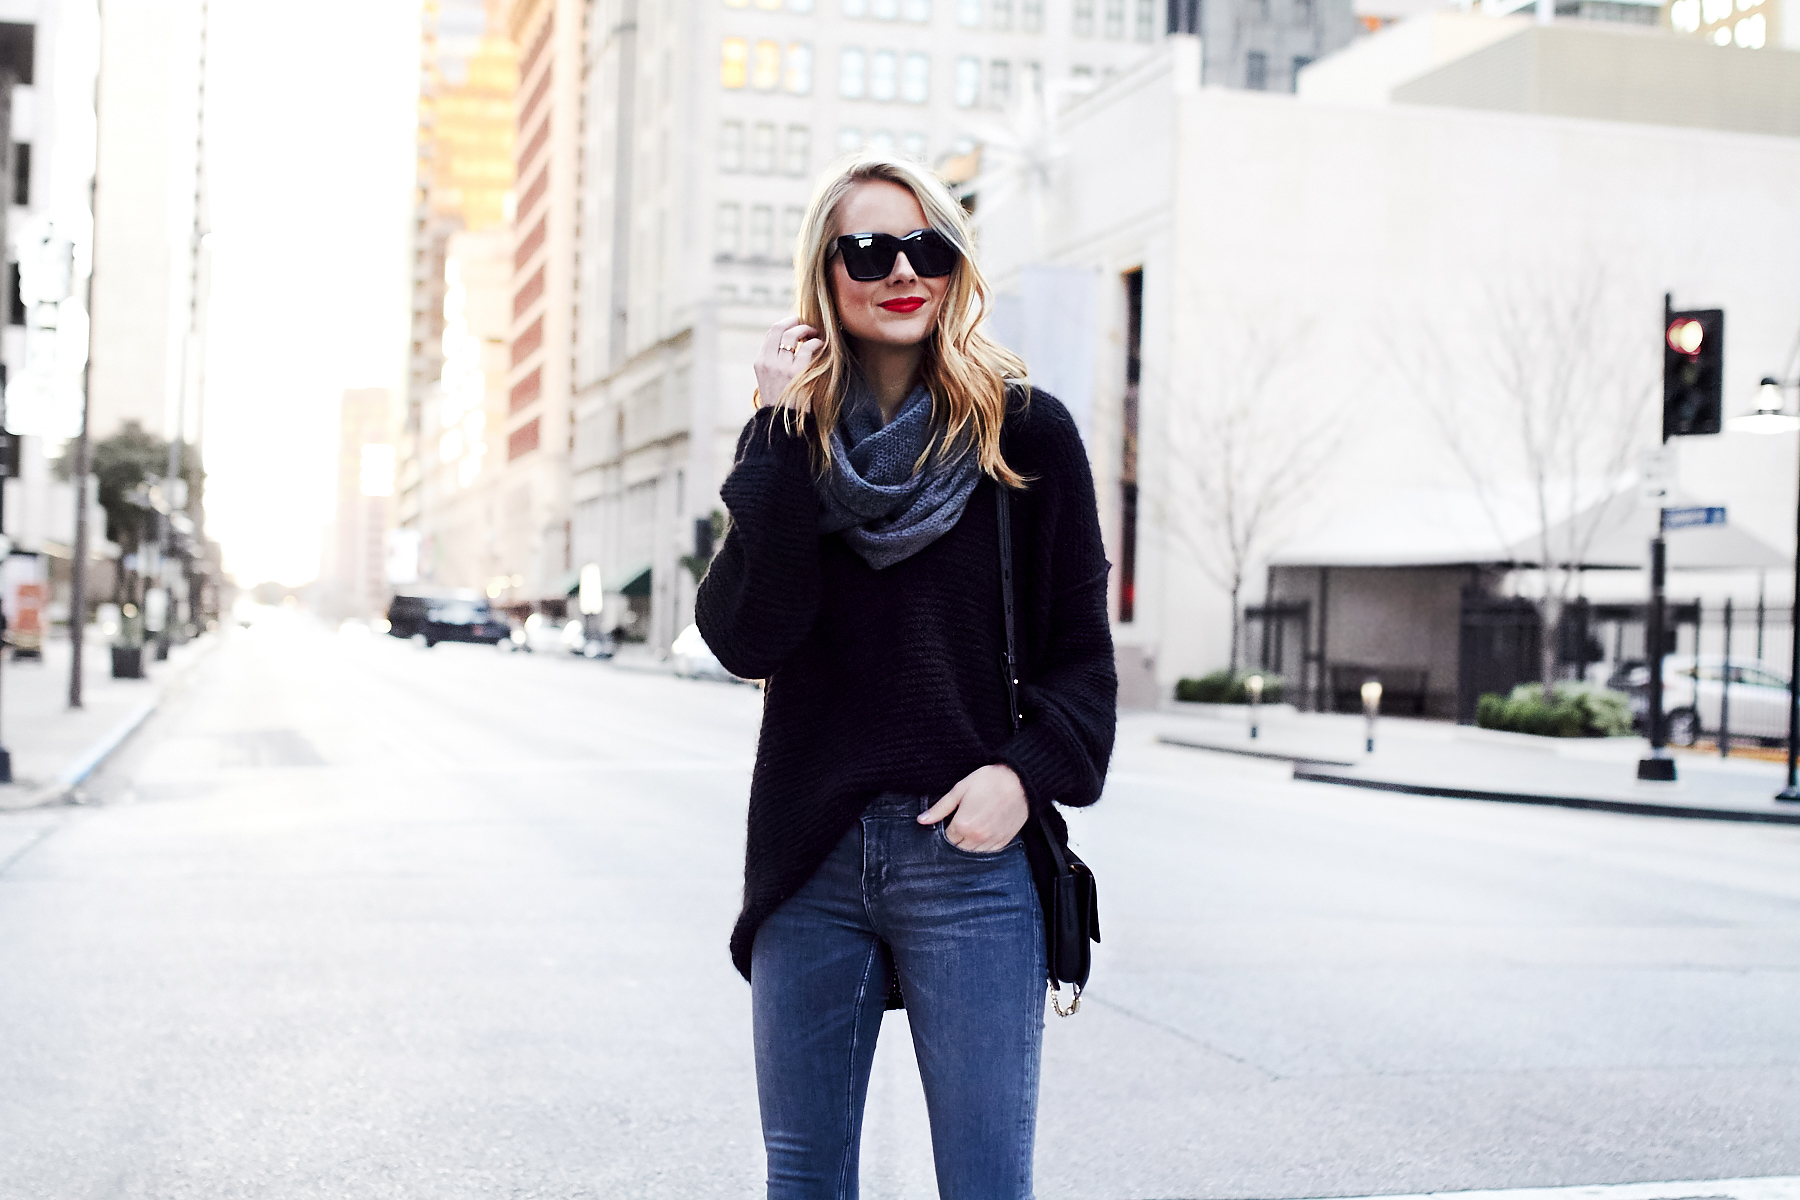 Fall Outfit, Winter Outfit, Black Oversized Sweater, Grey Skinny Jeans, Grey Infinity Scarf